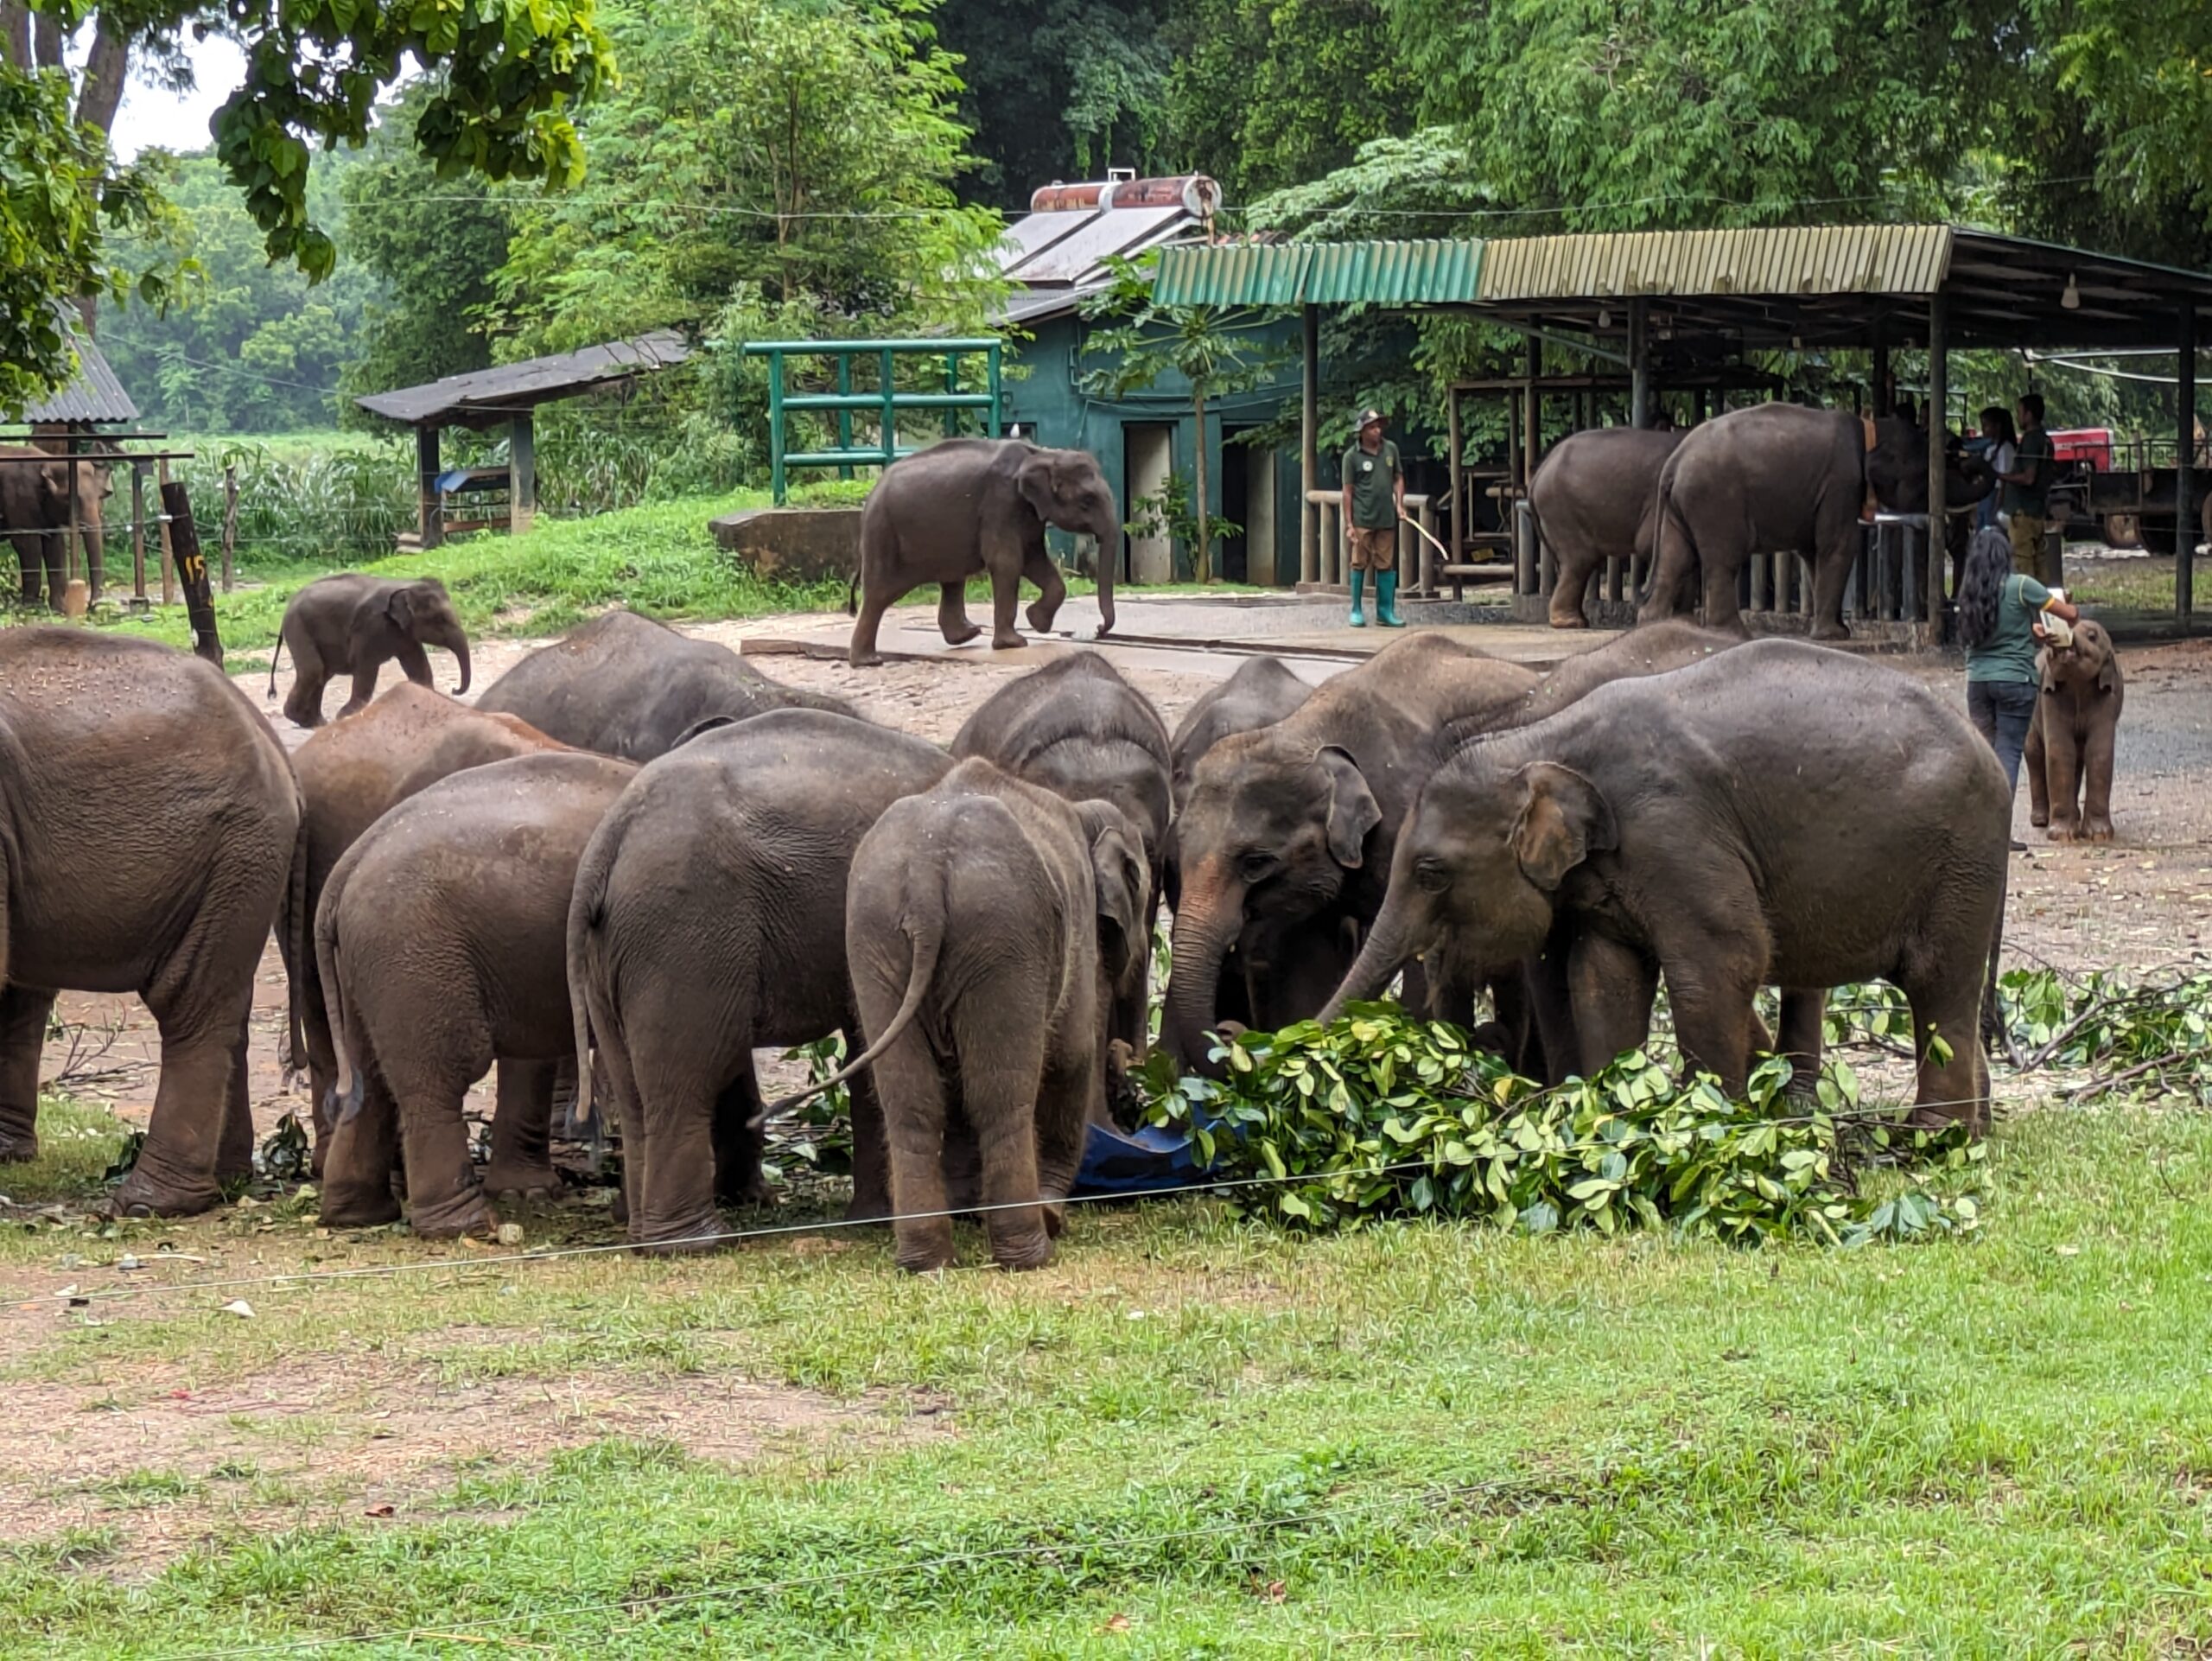 Feeding time for elephants at the Elephant Transit Centre © Marjie Courtis